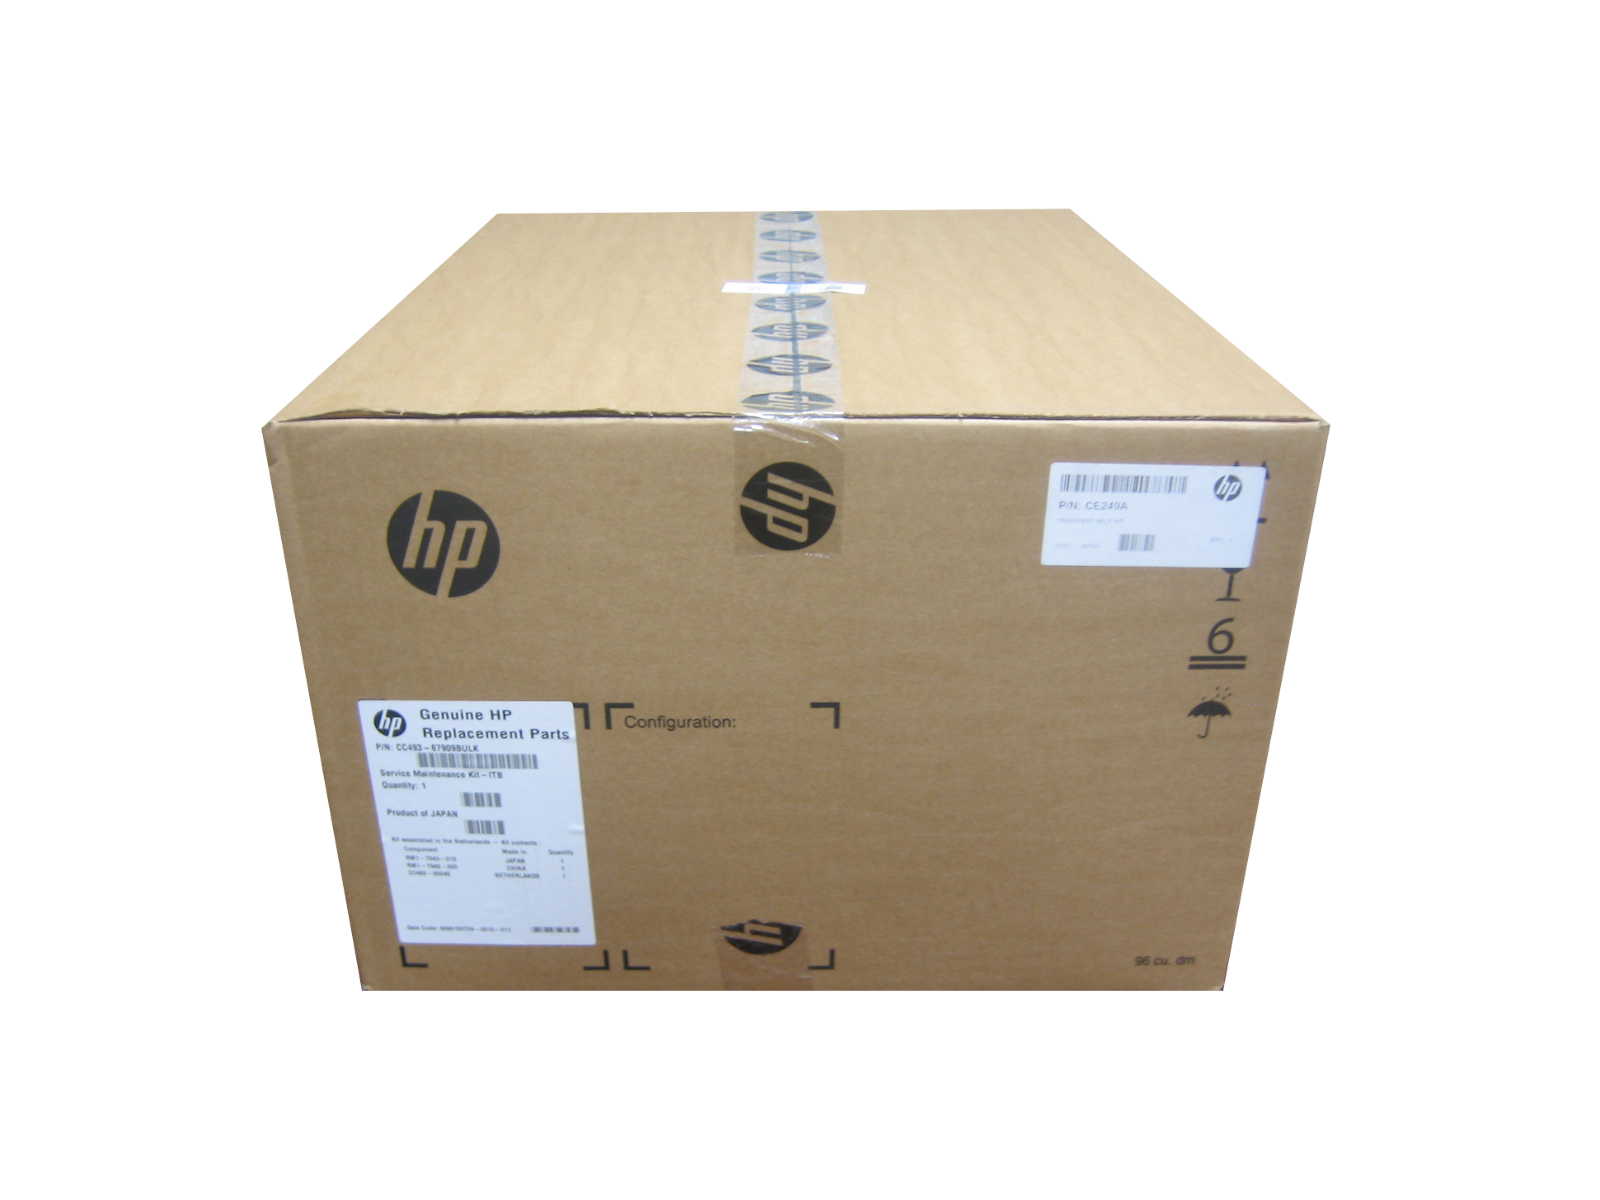 CP4525 Laserjet Printers HP CE249A Image Transfer Kit for CP4025 Renewed 